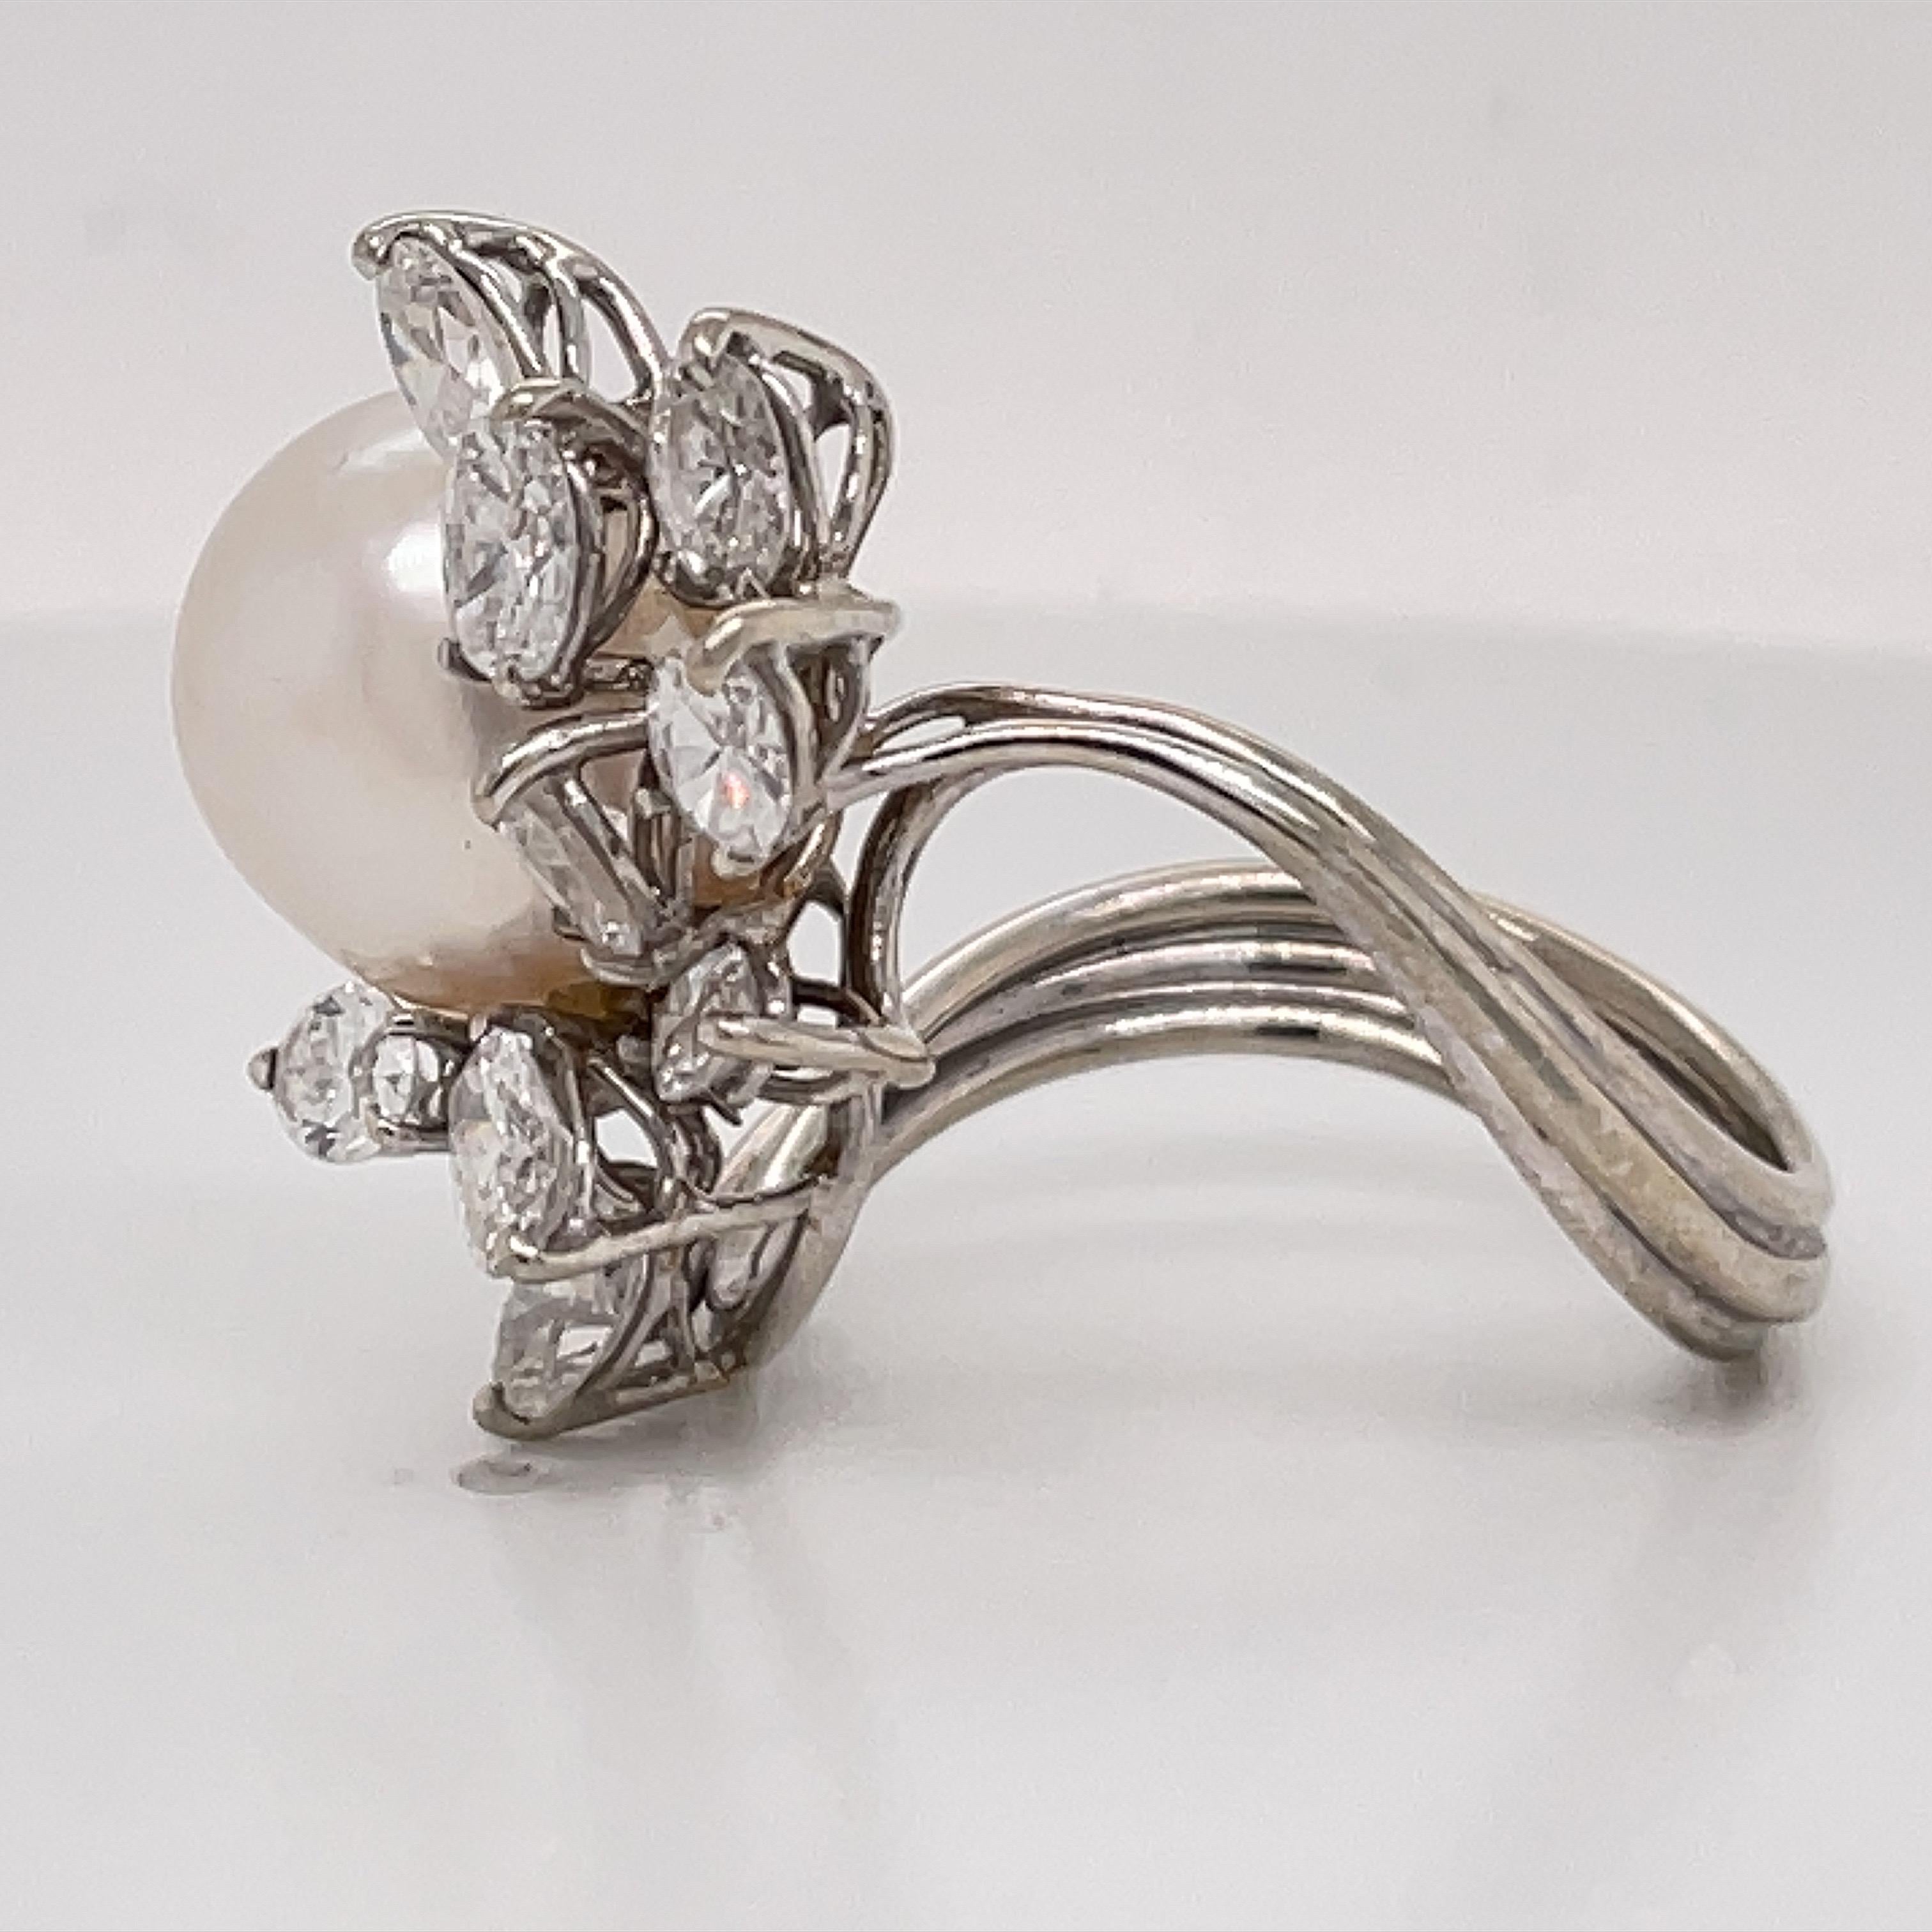 Australian South Sea Pearl Diamond Cluster Cocktail Ring 2 Carats 14K White Gold 1